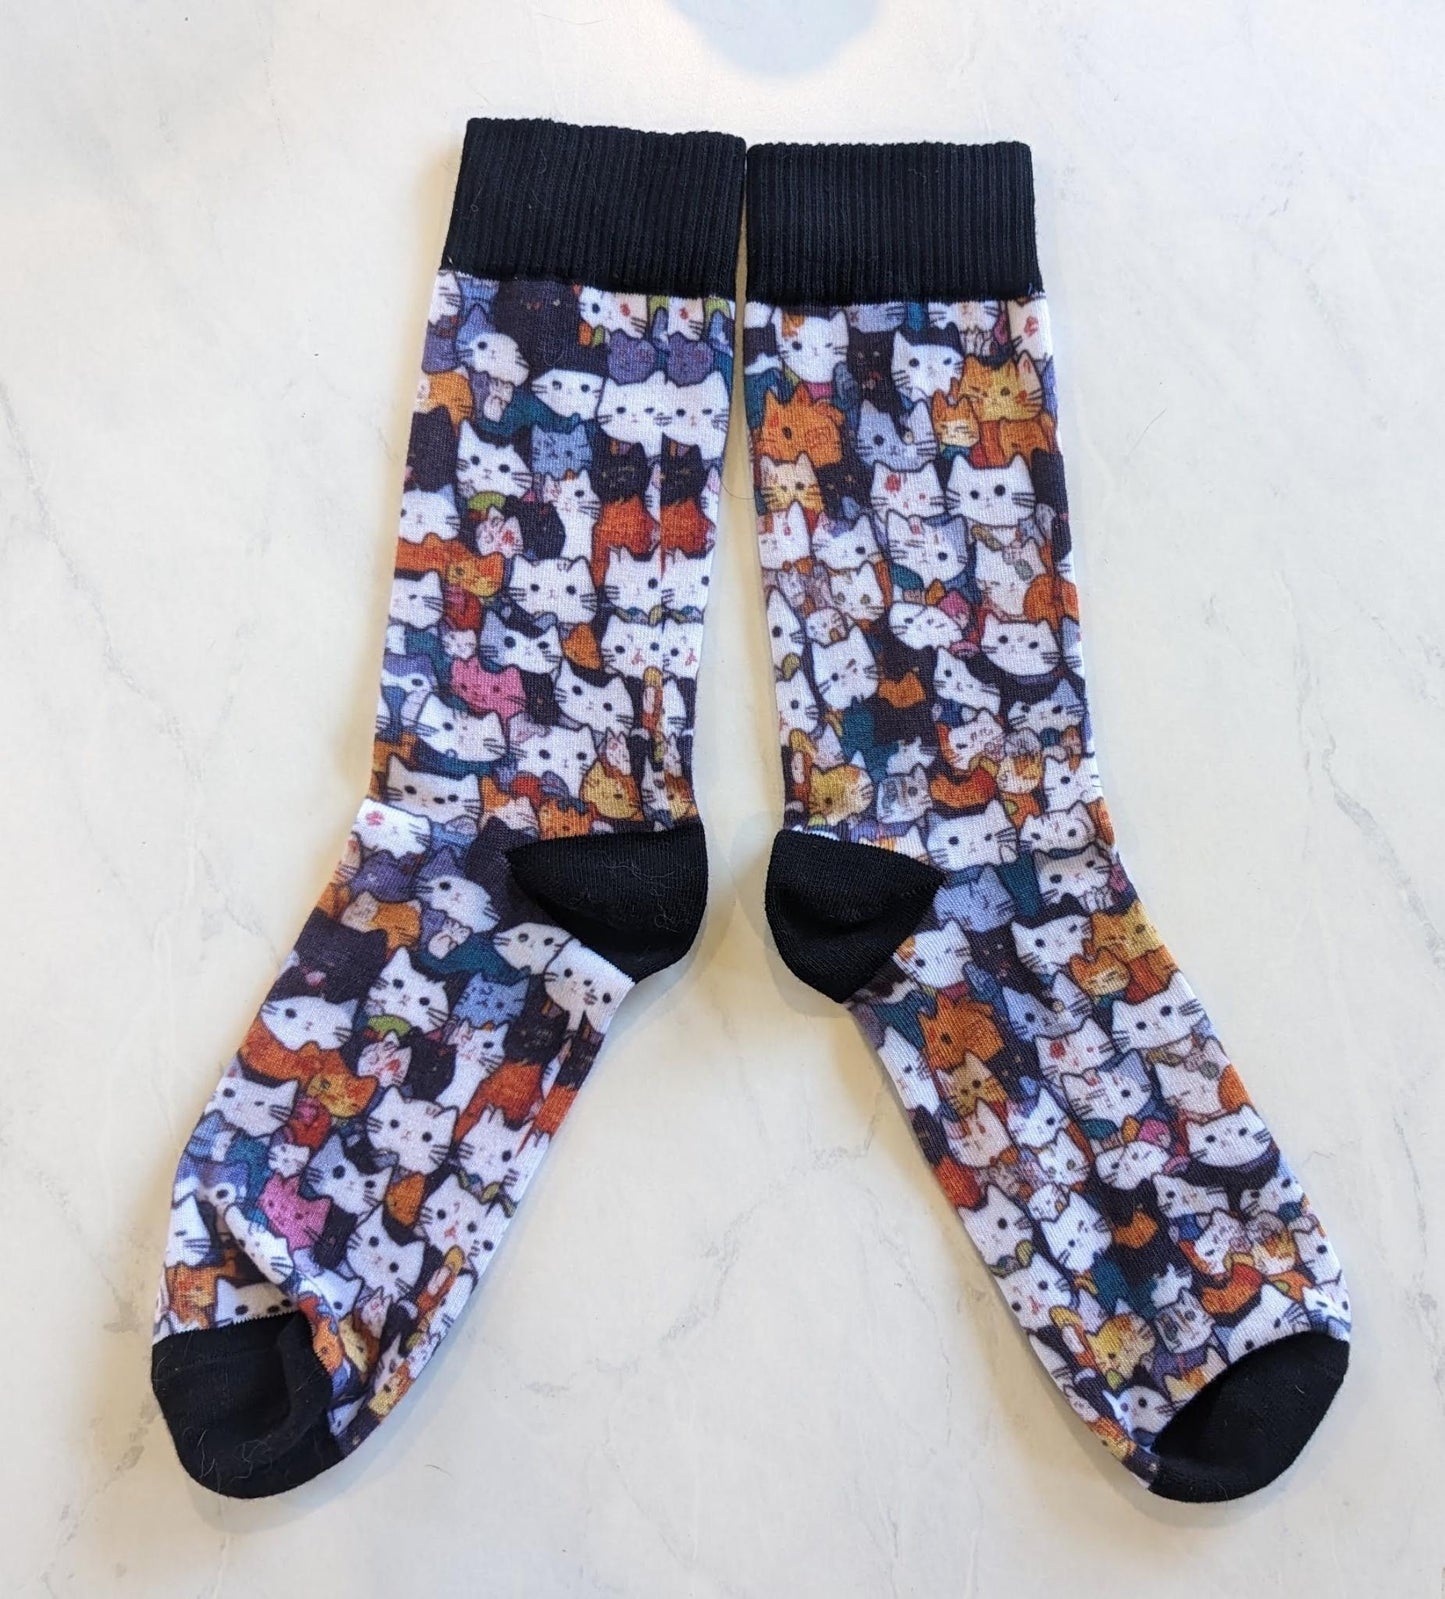 A pair of socks with black toes, heels, and top. The socks otherwise are patterned with AI-generated cat heads that look like cute illustrations of a bunch of different cats. The cats come in a variety of colors, black, white, orange calico, grey, white and grey, and a few that stand out as colored differently (like pink or having a green spot).